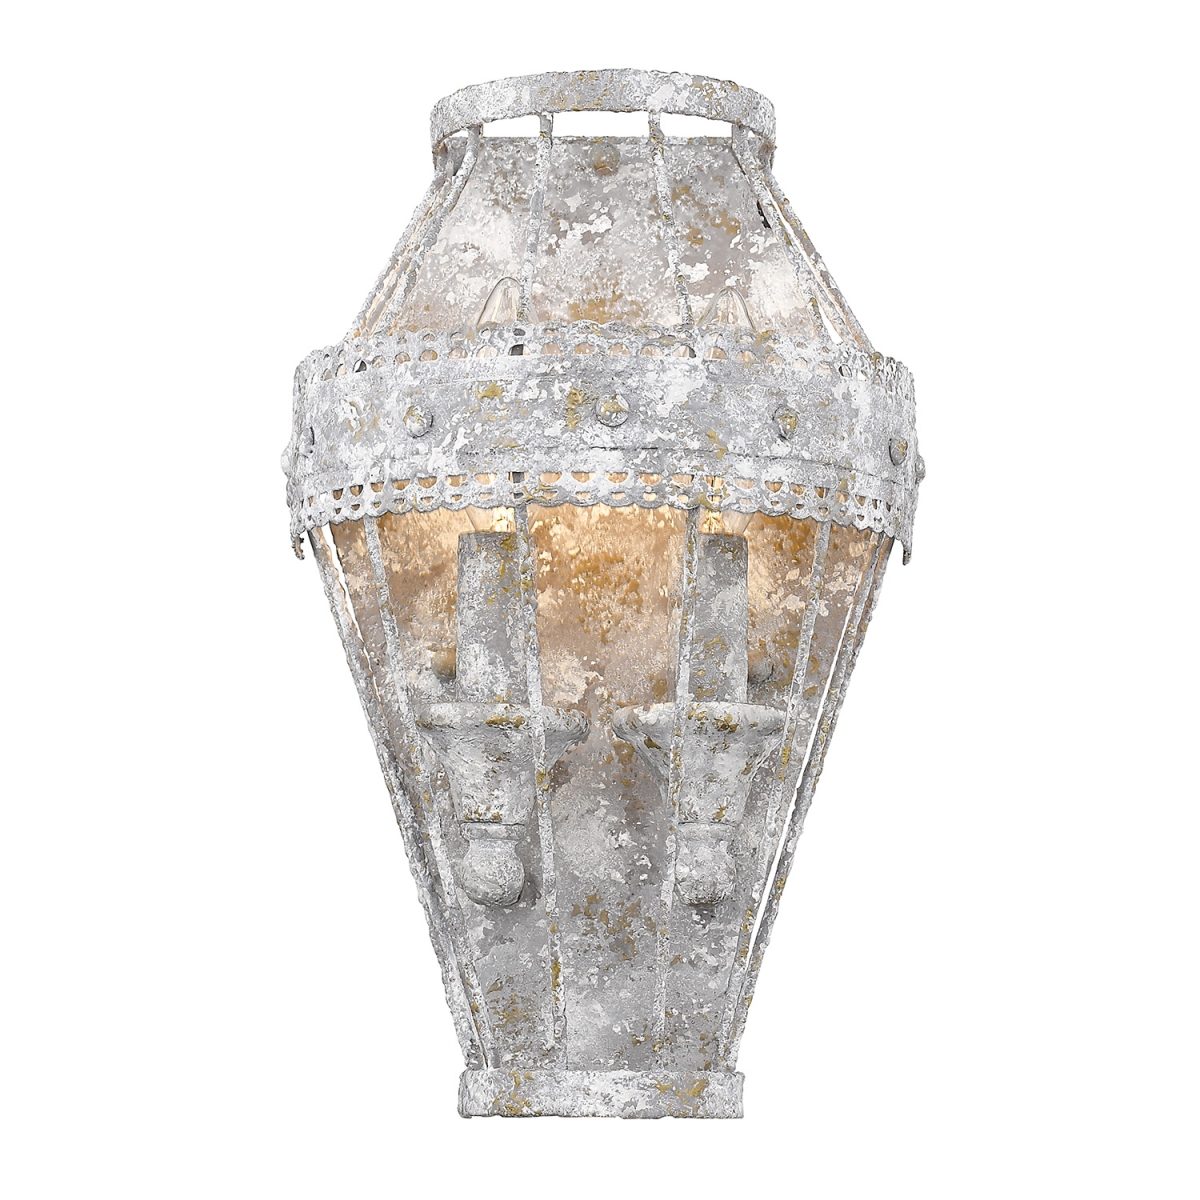 7856-wsc Oy Ferris 1 Light Wall Sconce, Oyster